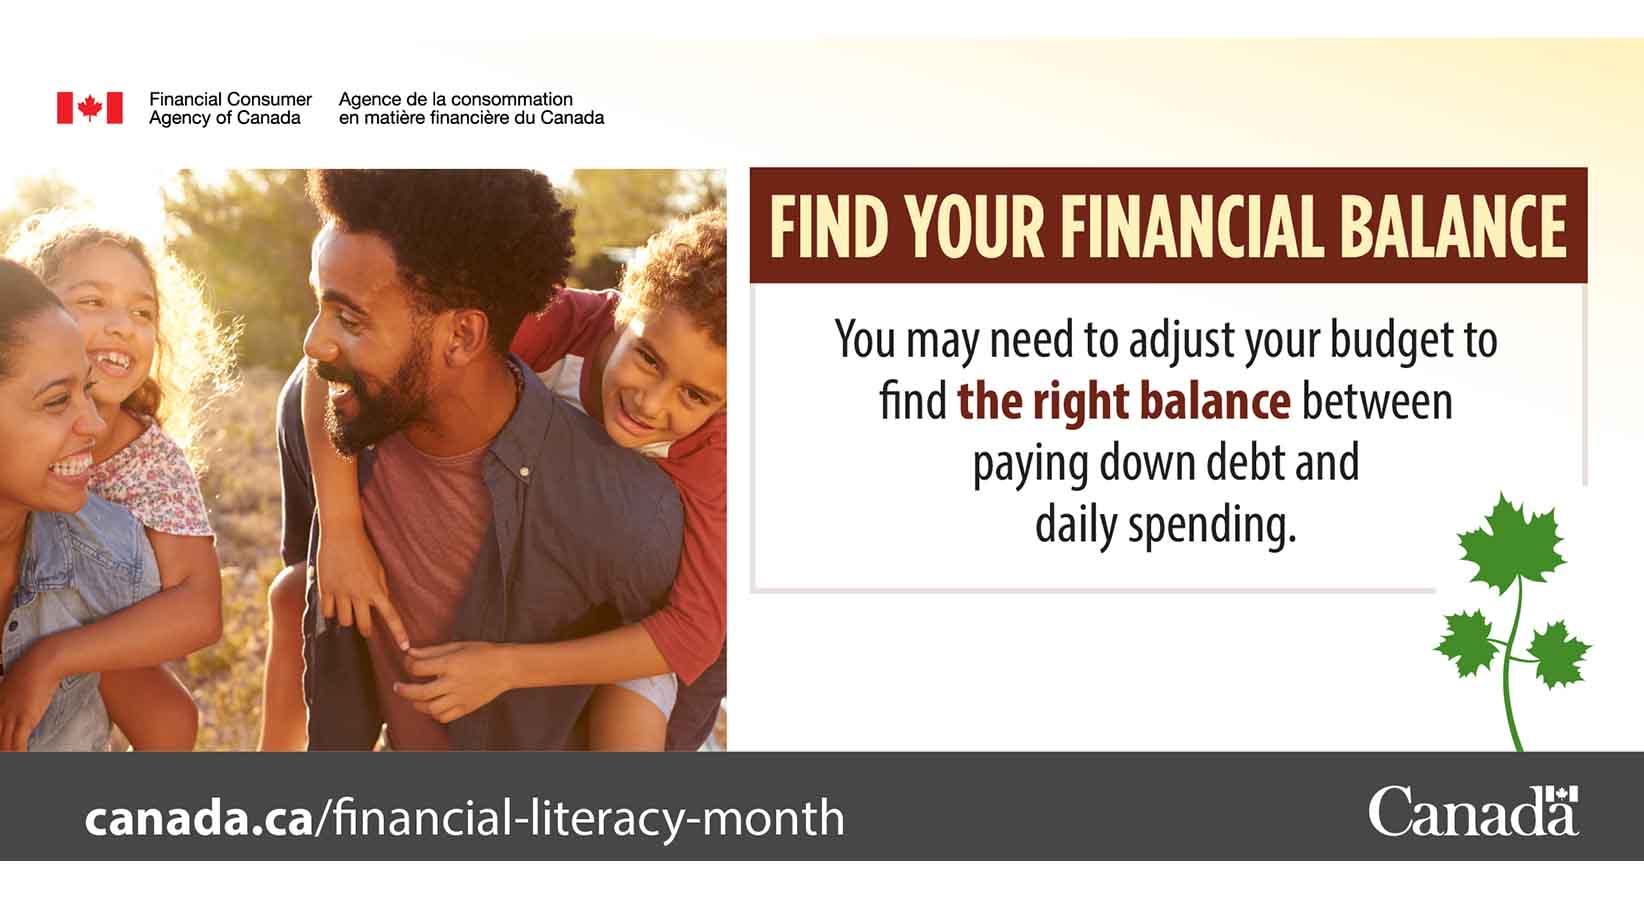 Find your financial balance You may need to adjust your budget to find the right balance between paying down debt and daily spending.